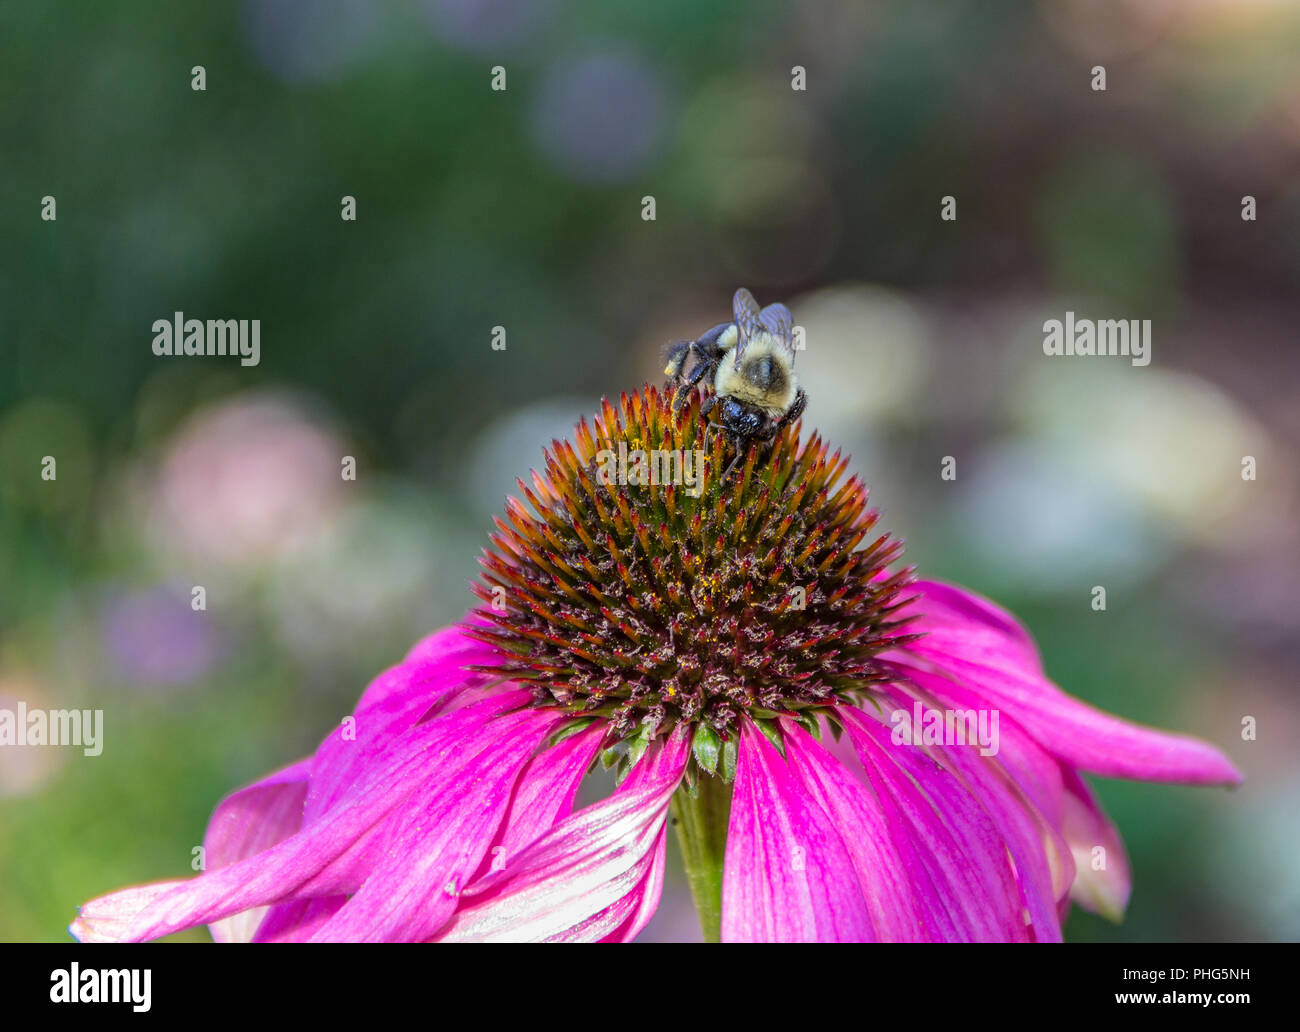 A Bee on a Pink Echinacea Flower Head Close Up, Macro, Summertime, Wildlife, Insects Stock Photo